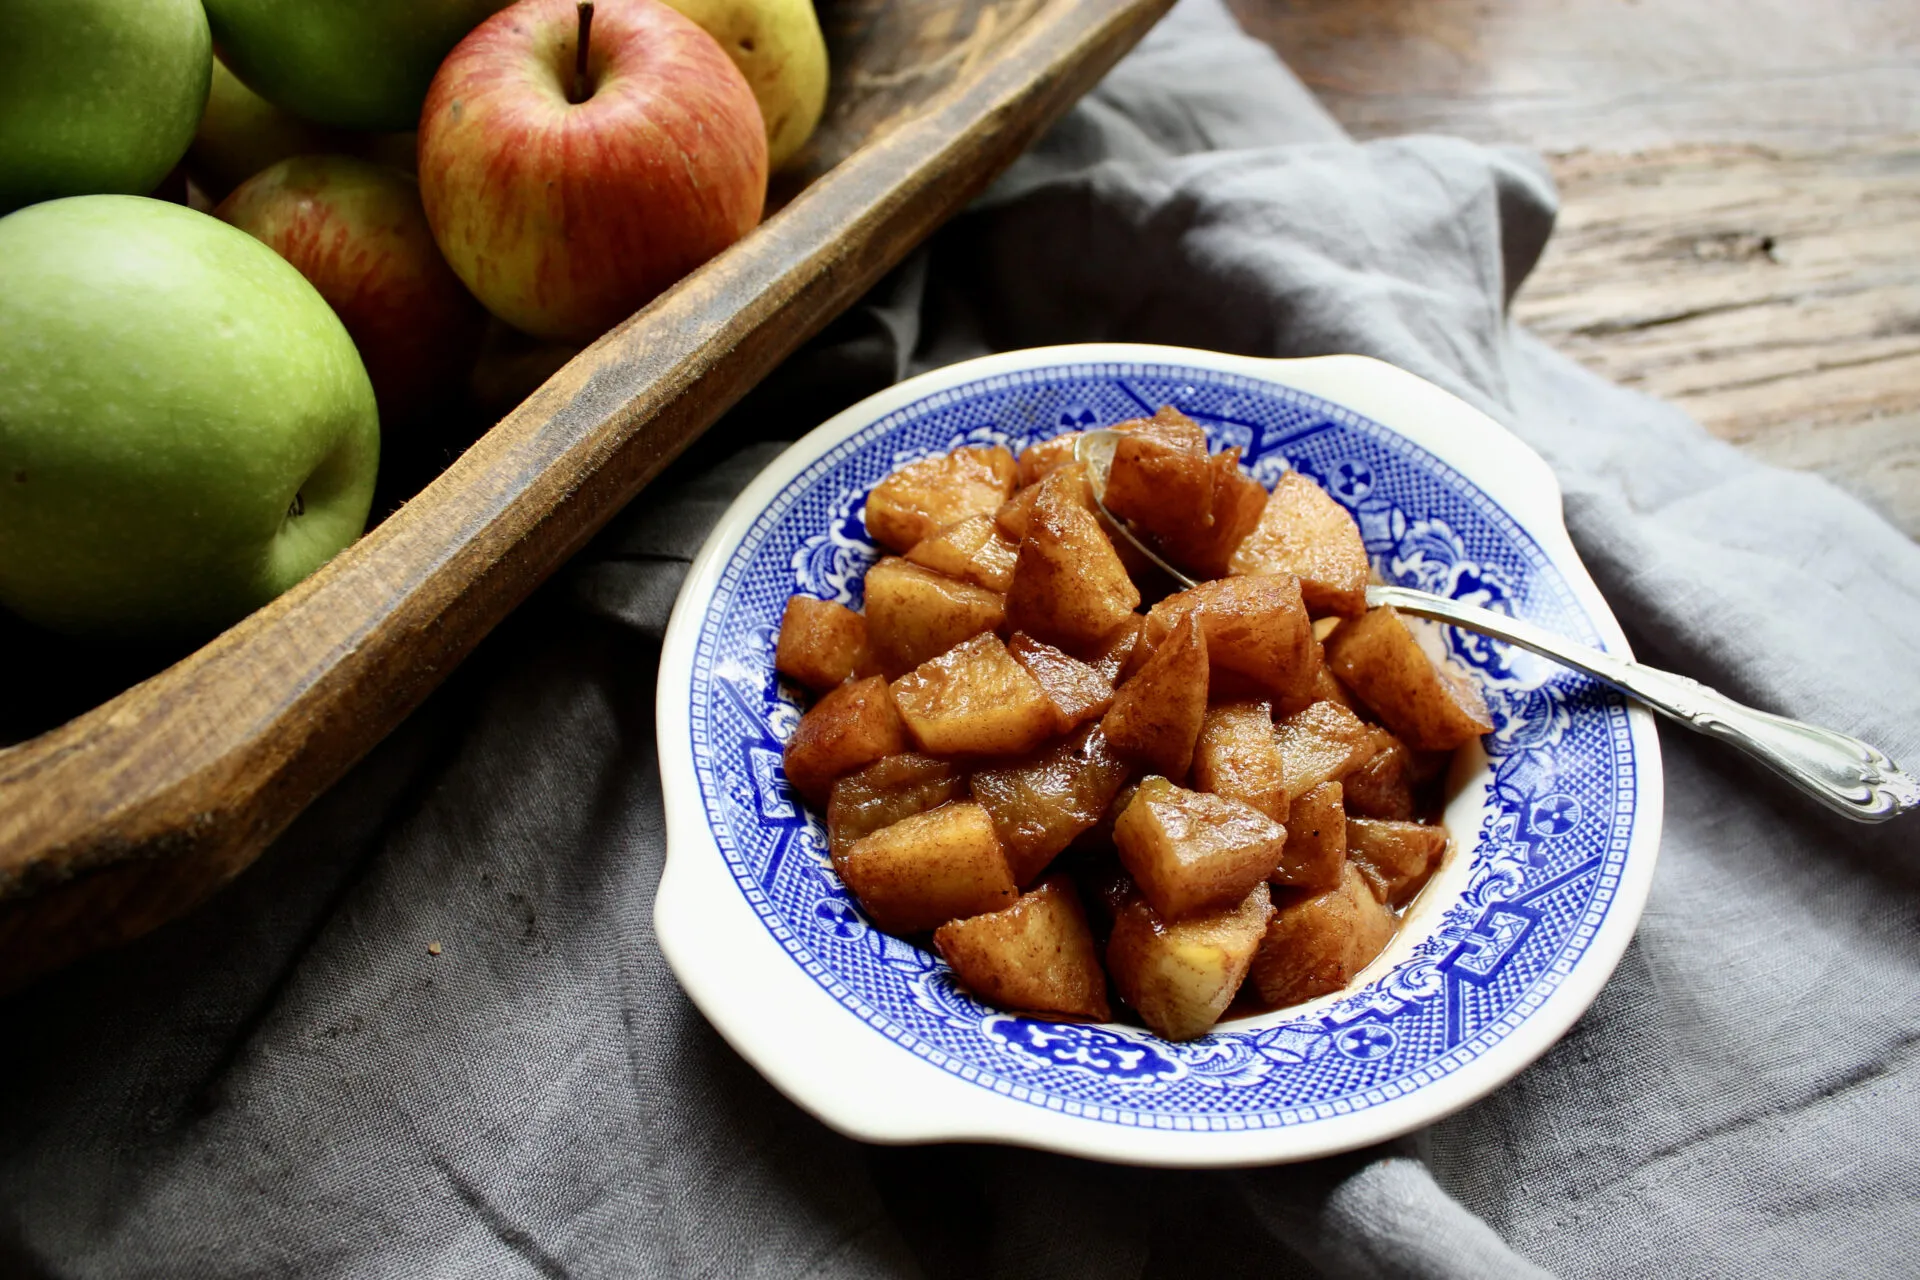 Brandied Cinnamon Stewed Apples are perfect as a side dish or spooned on top of a bowl of ice cream. So quick & so easy!